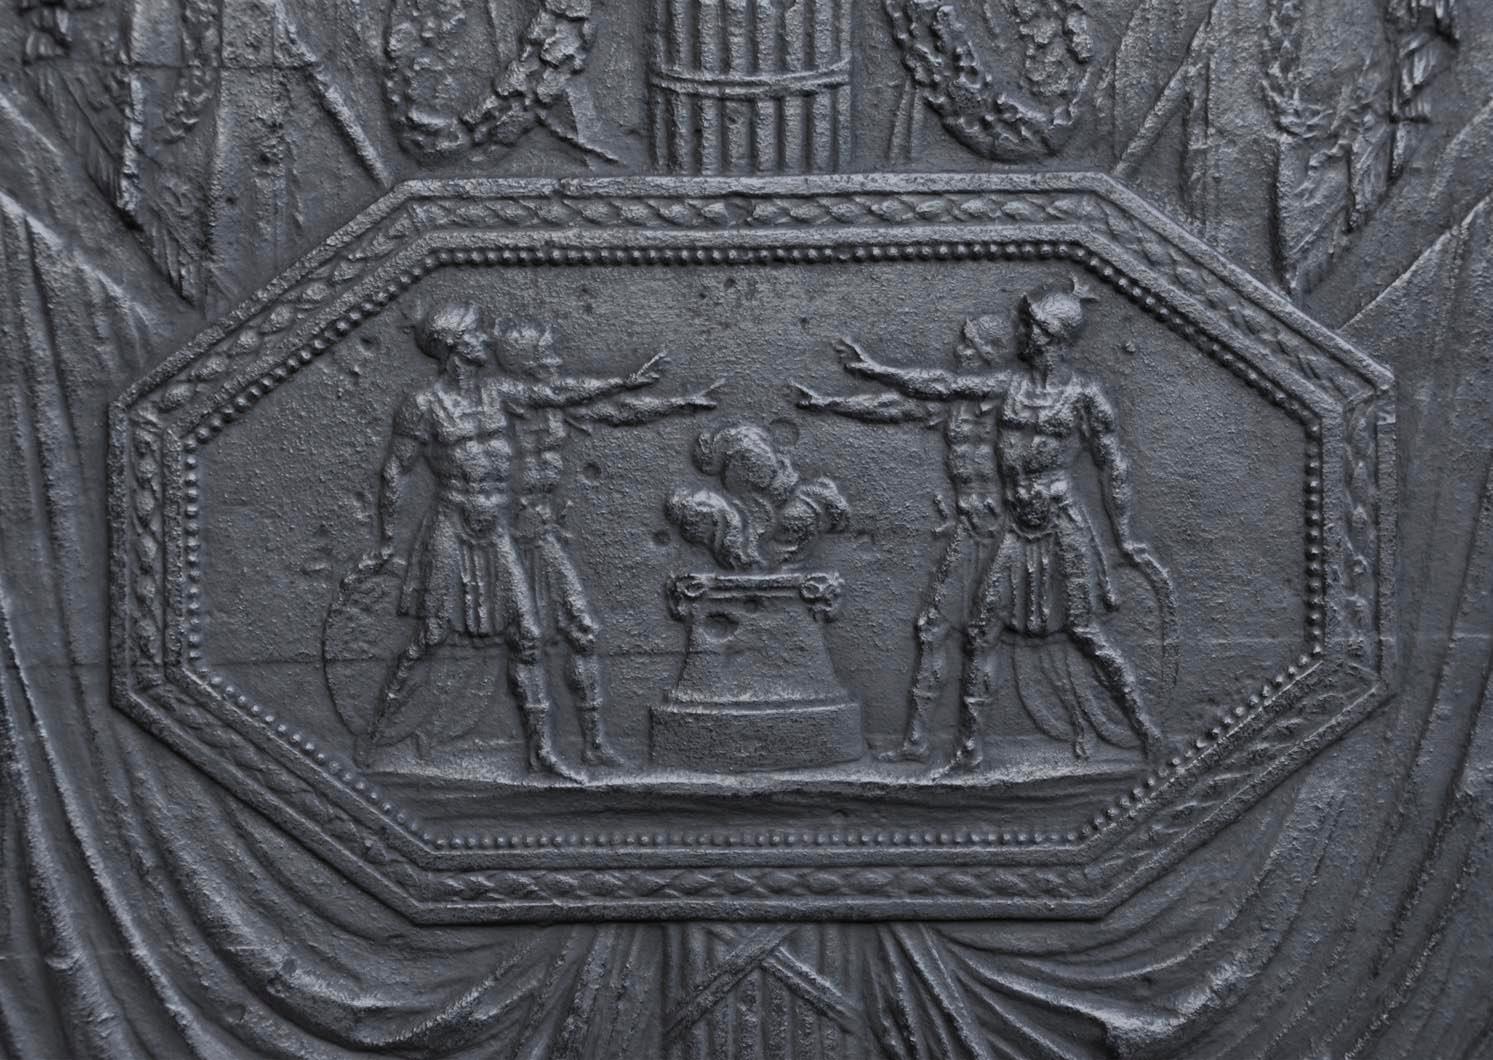 This antique fireback was made in the first half of the 19th century. In the center, in an octagonal medallion, four armed soldiers in antique-inspired outfit vigorously raise their arms over a fire. Their pose is directly inspired by David's